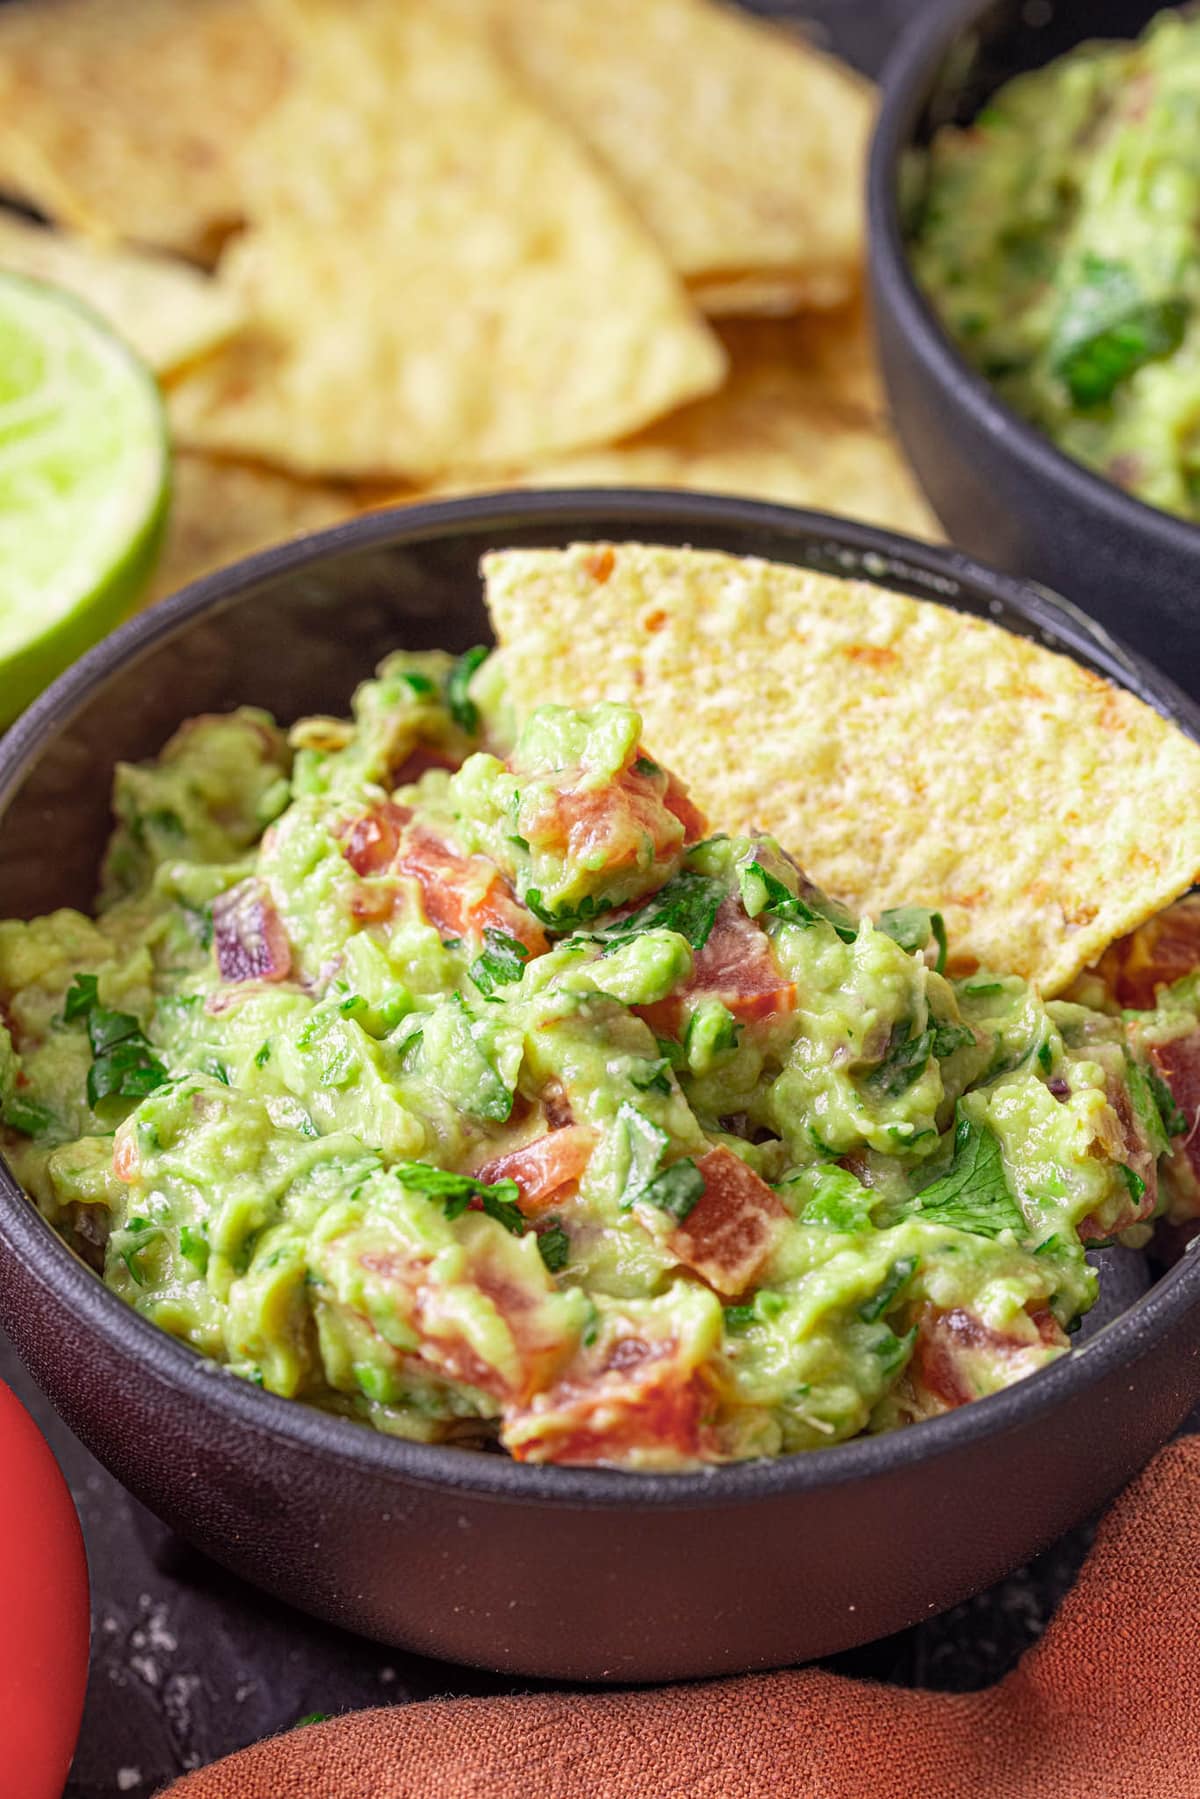 A serving of guacamole dip in a black bowl.